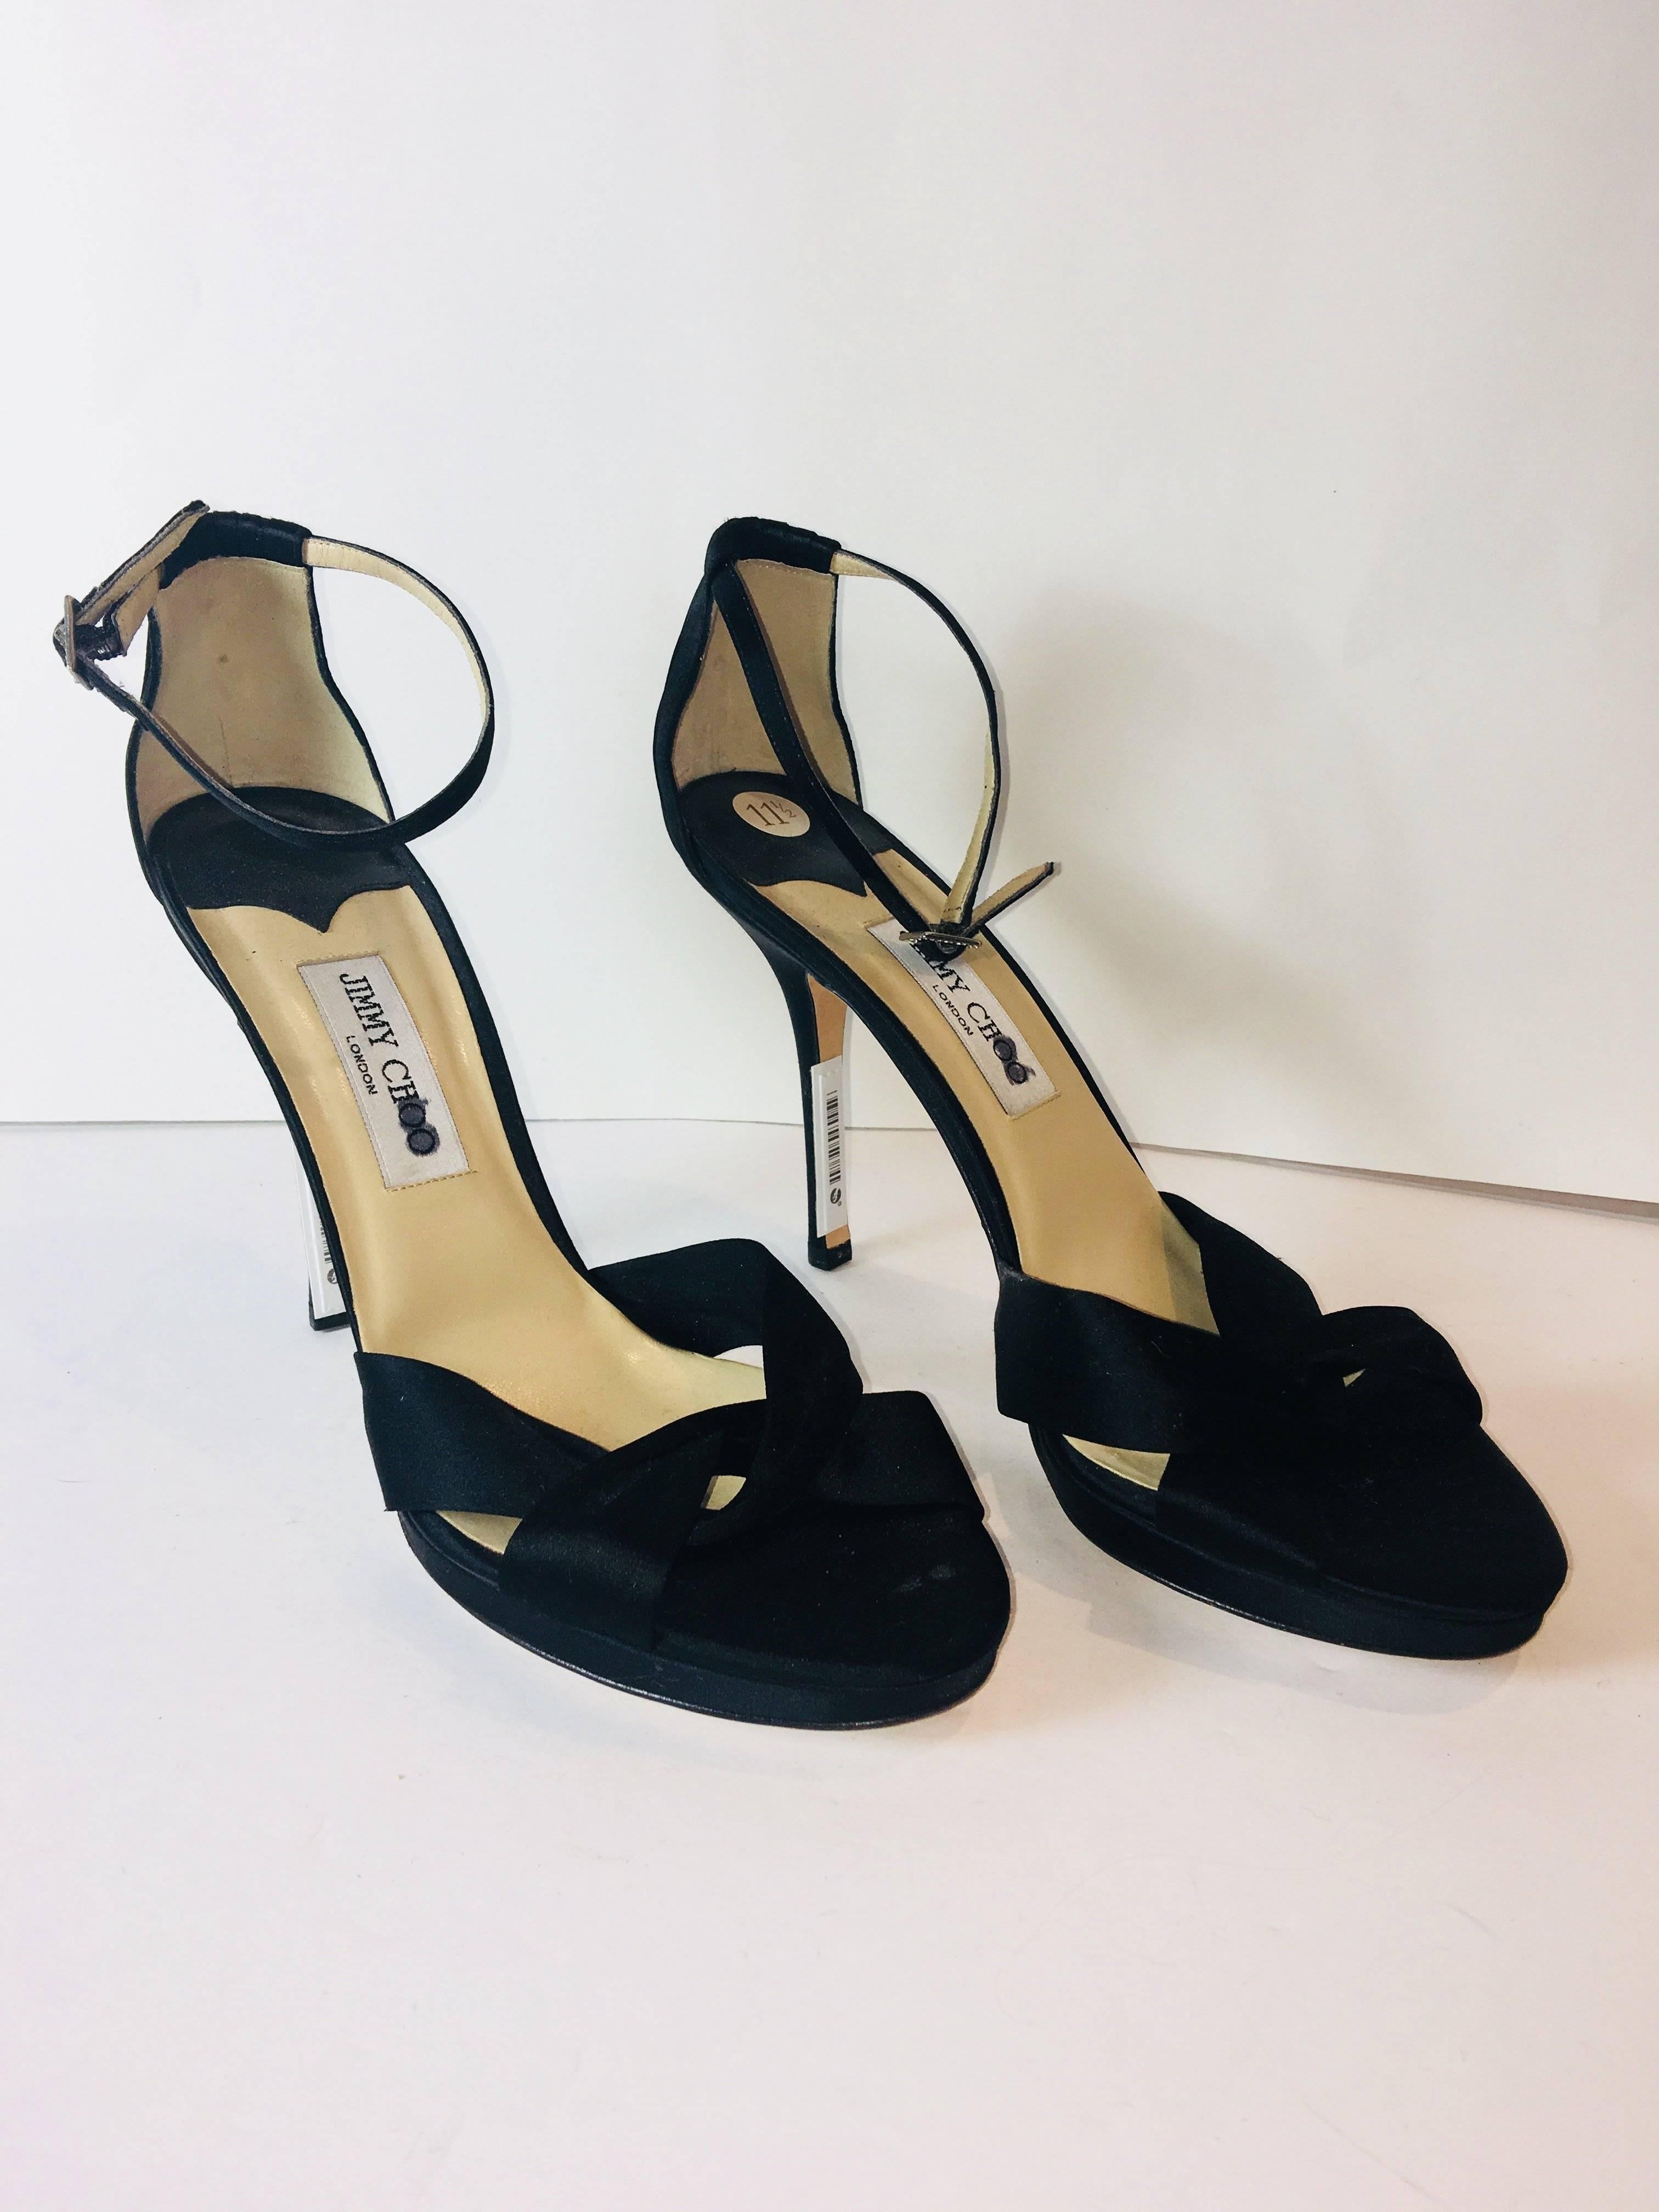 Jimmy Choo Ankle Strap Heel with Criss Cross Straps at Toe in Satin.